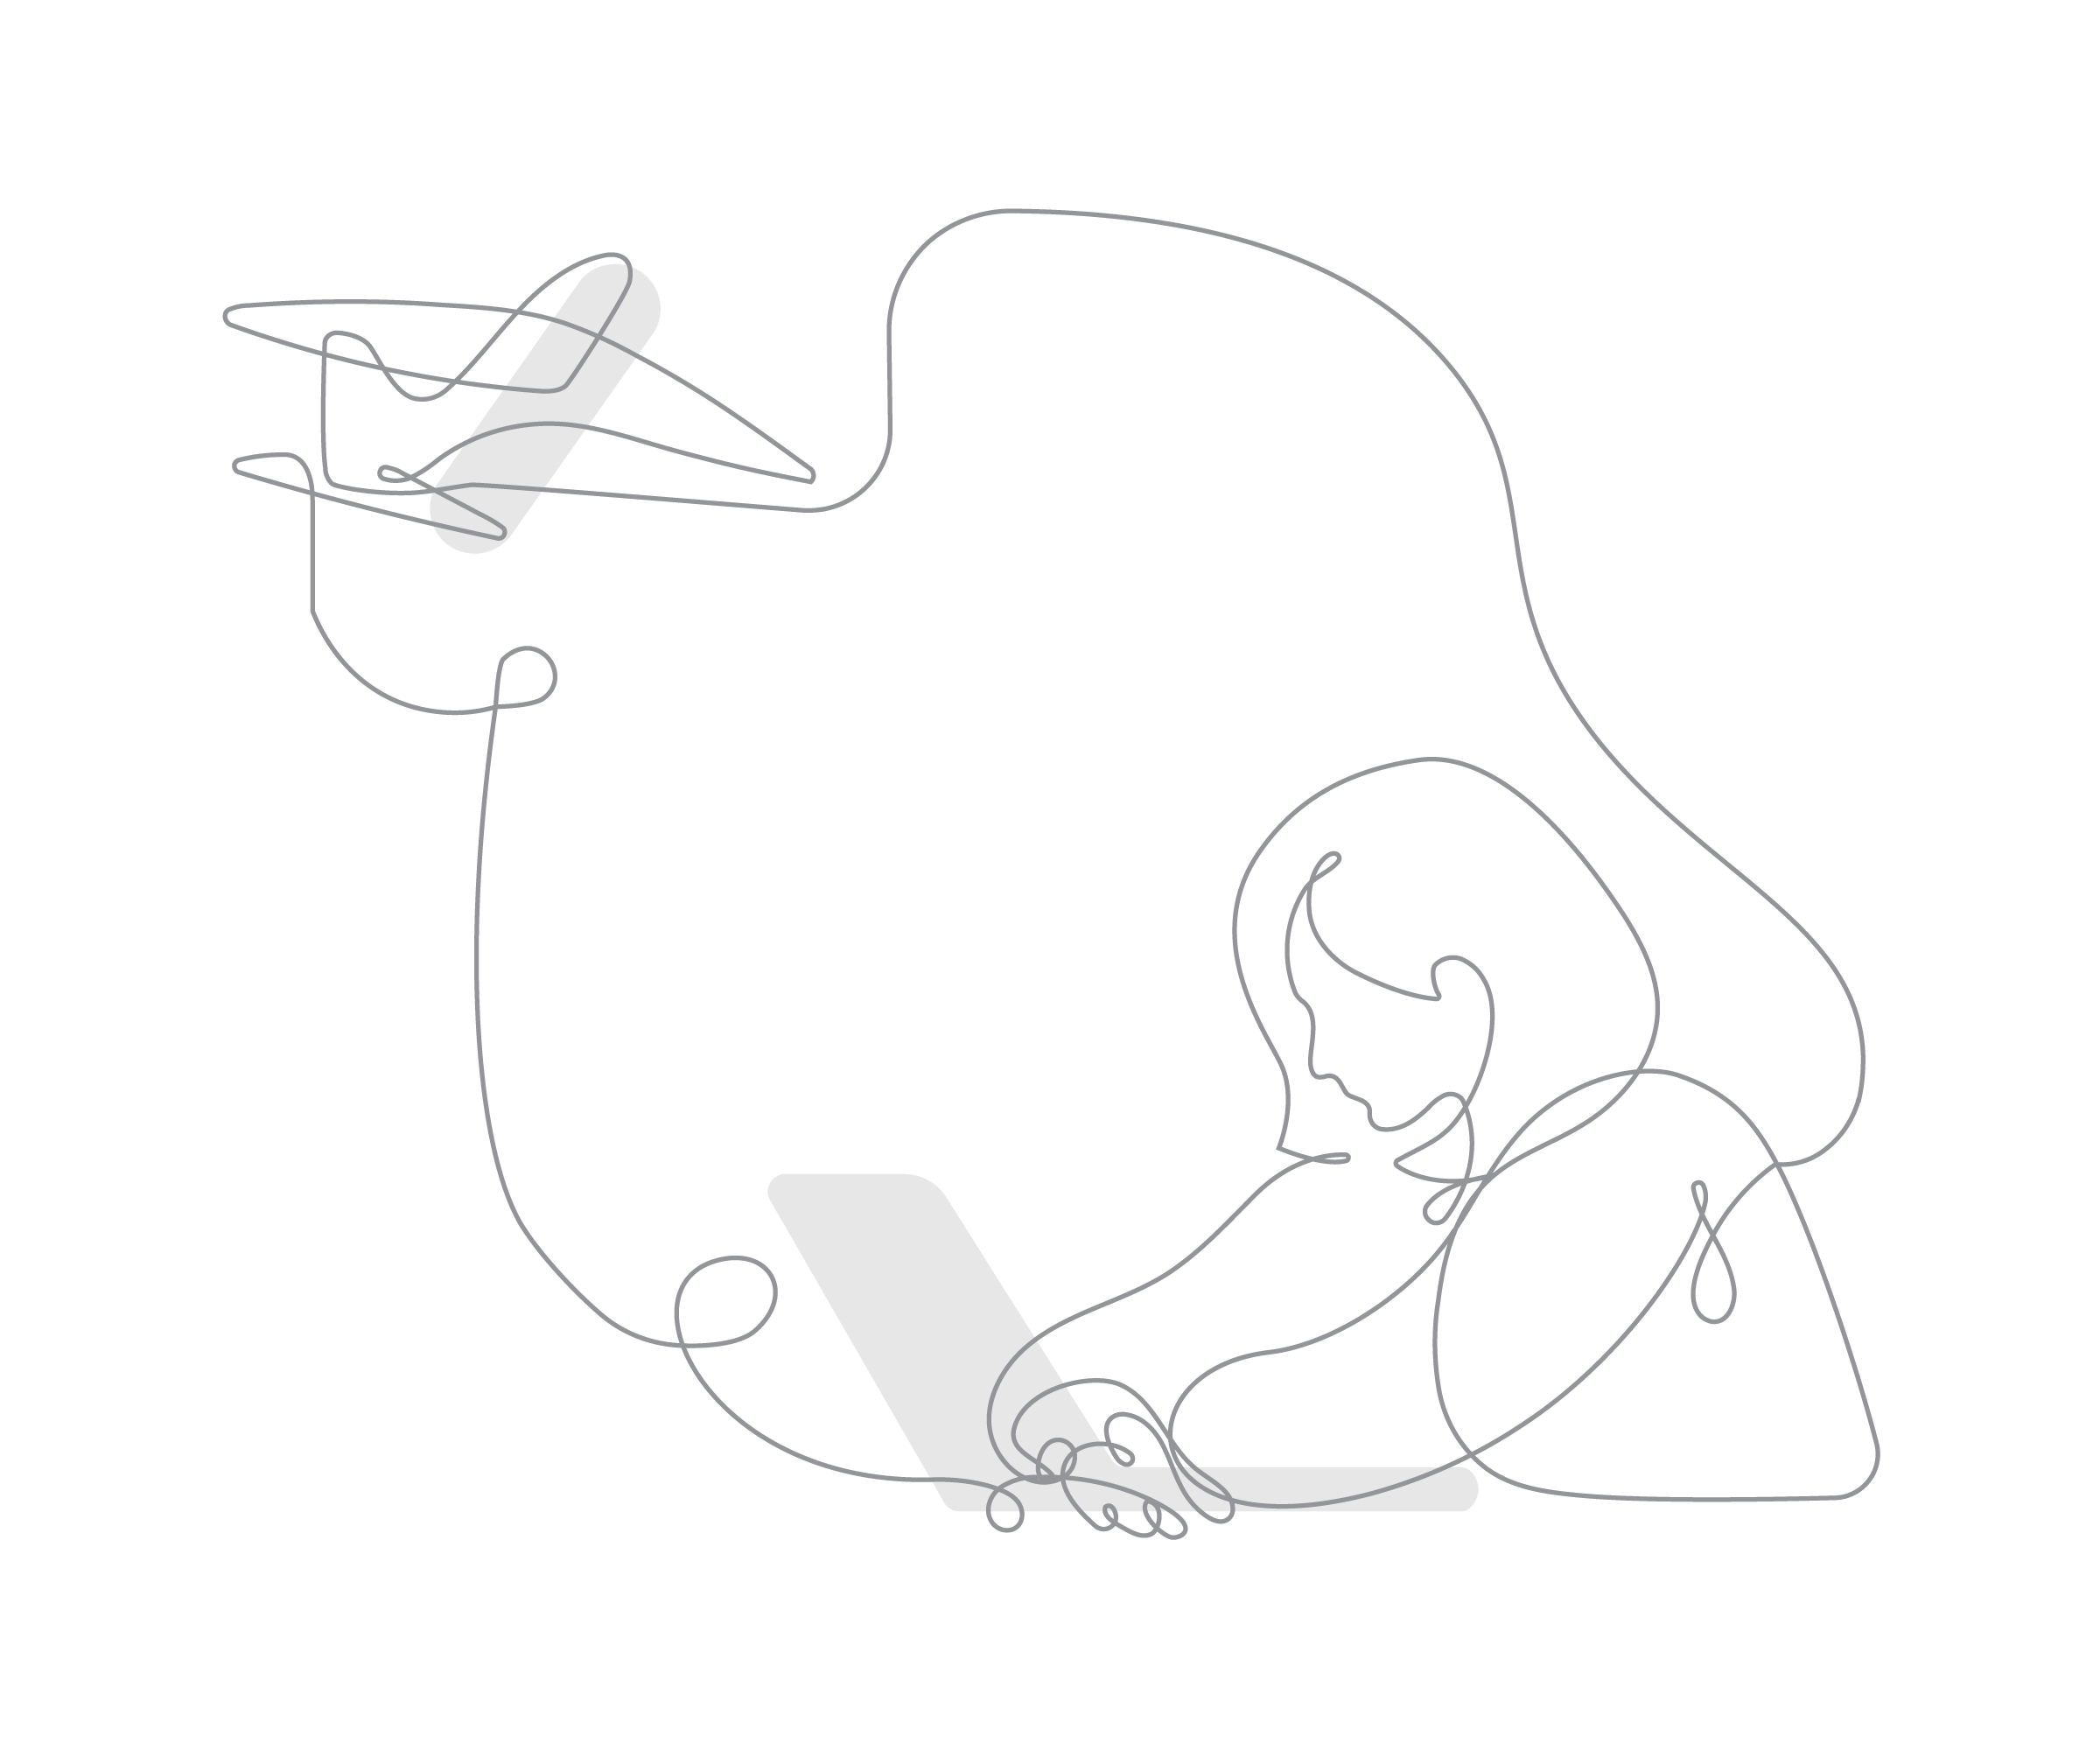 Line art of a person using a laptop with a continuous line forming a hand holding a pencil above, all on a black background for the Science newsletter.